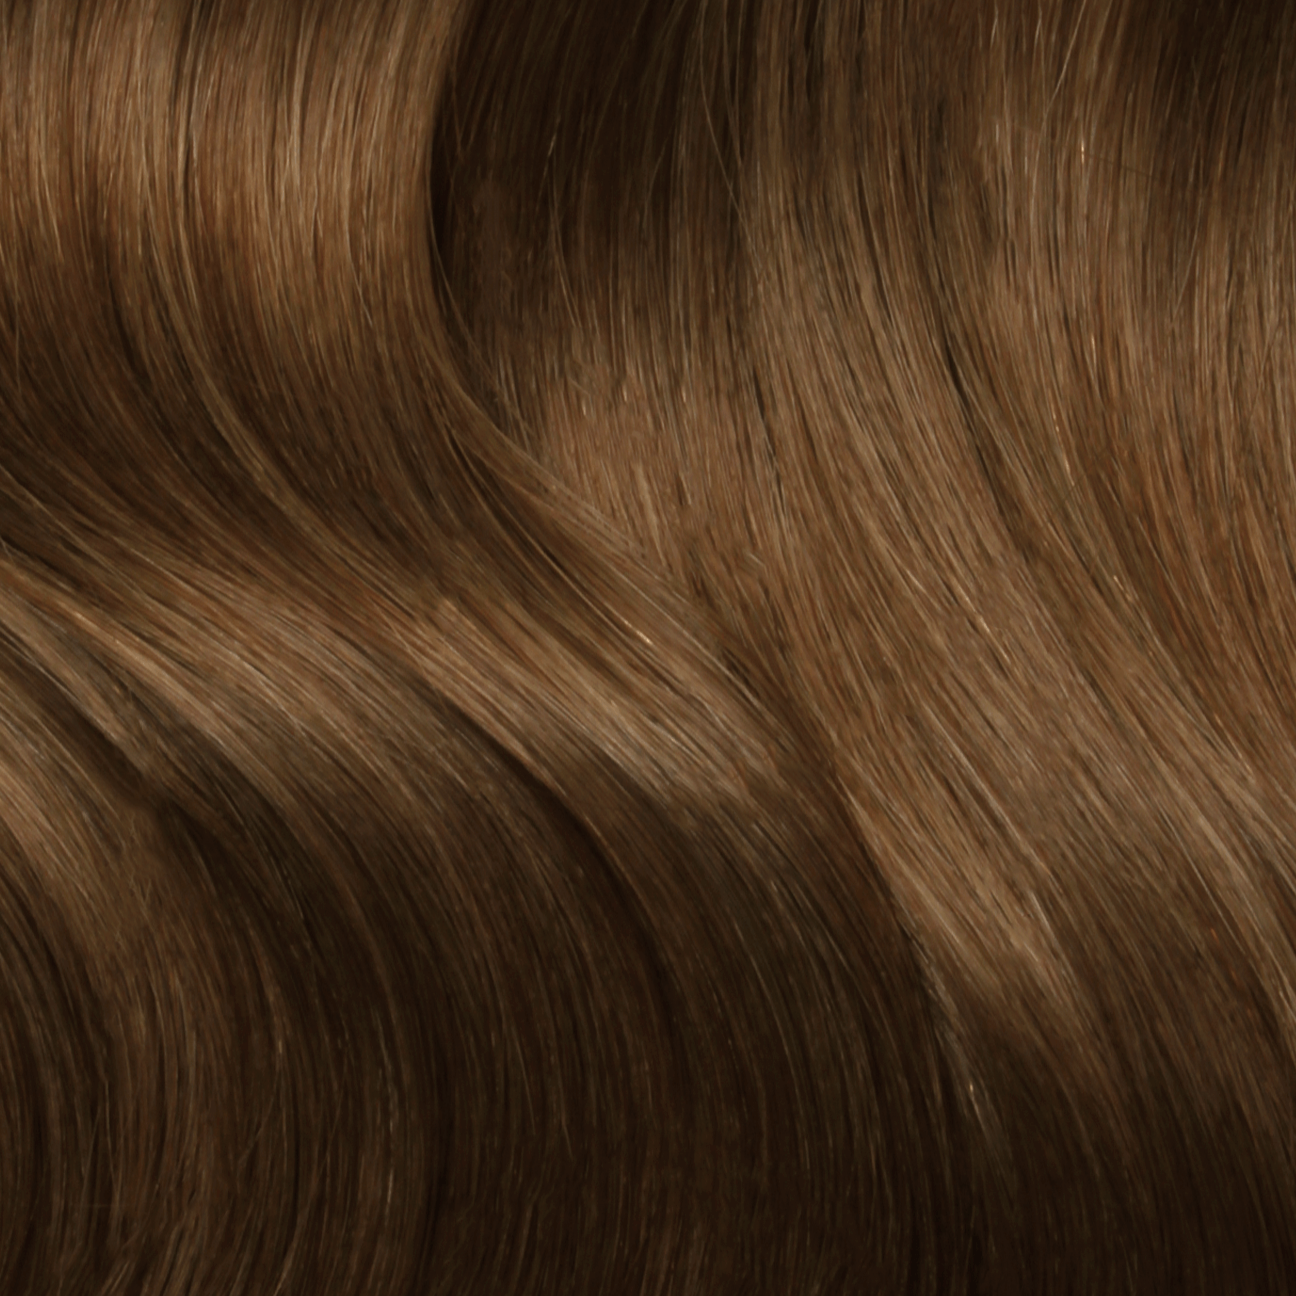 Nano Bonds 18 Inches - SWAY Hair Extensions Chestnut-Brown-4 Ultra-fine, invisible bonds for a flawless, natural look. 100% Remy Human hair, lightweight and versatile. Reusable and perfect for individual or salon use.